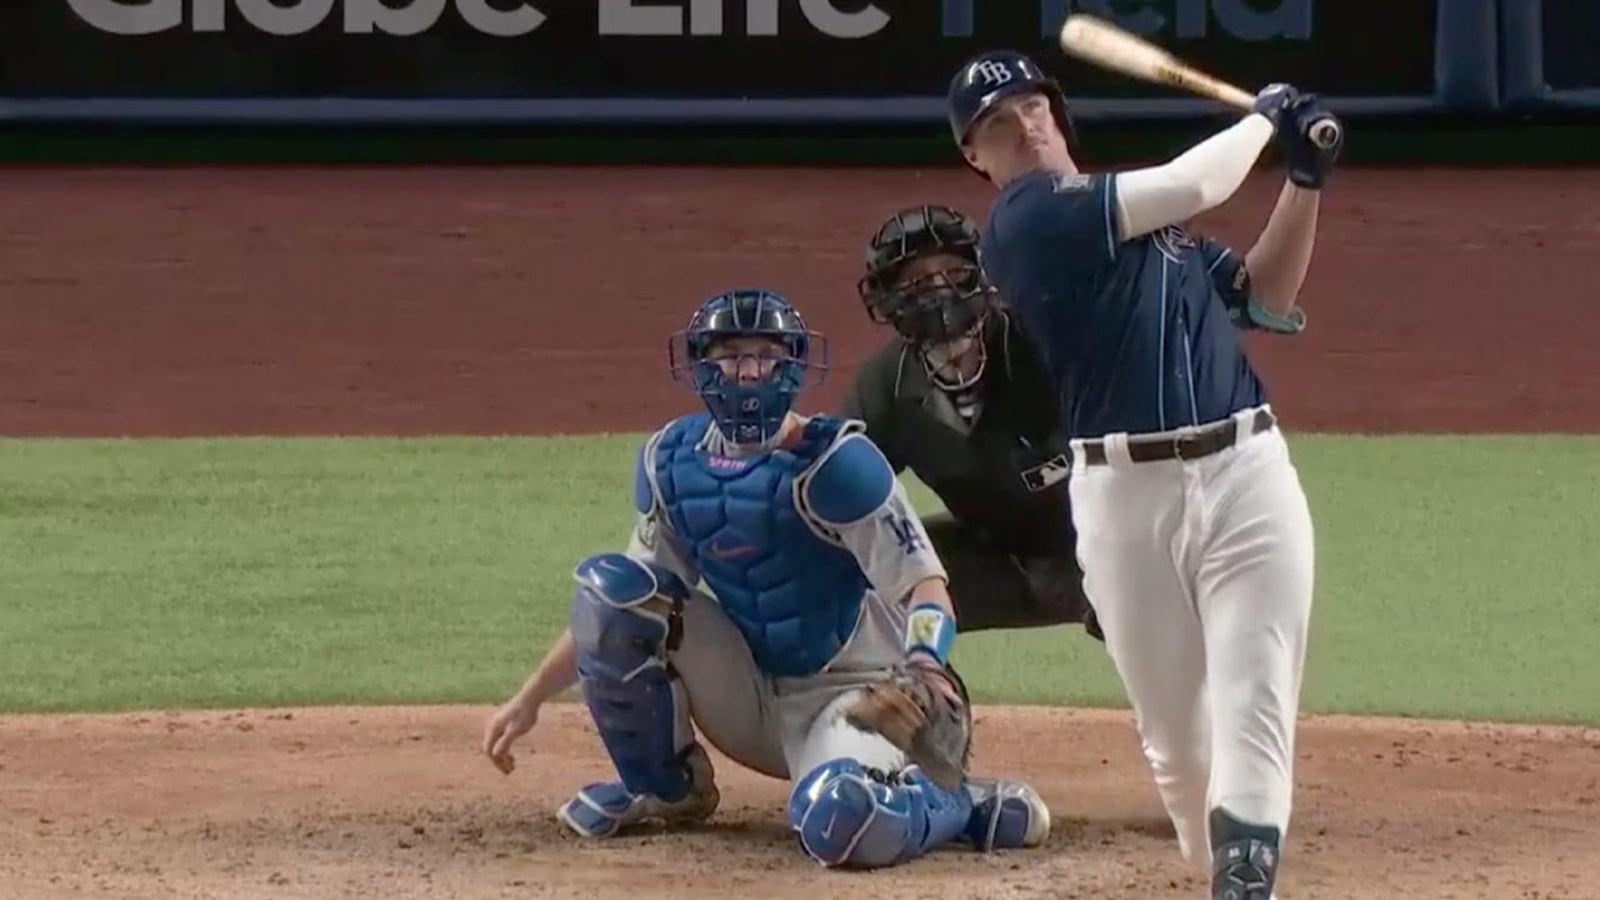 Hunter Renfroe blasts a homer to put Rays within one in the 5th inning